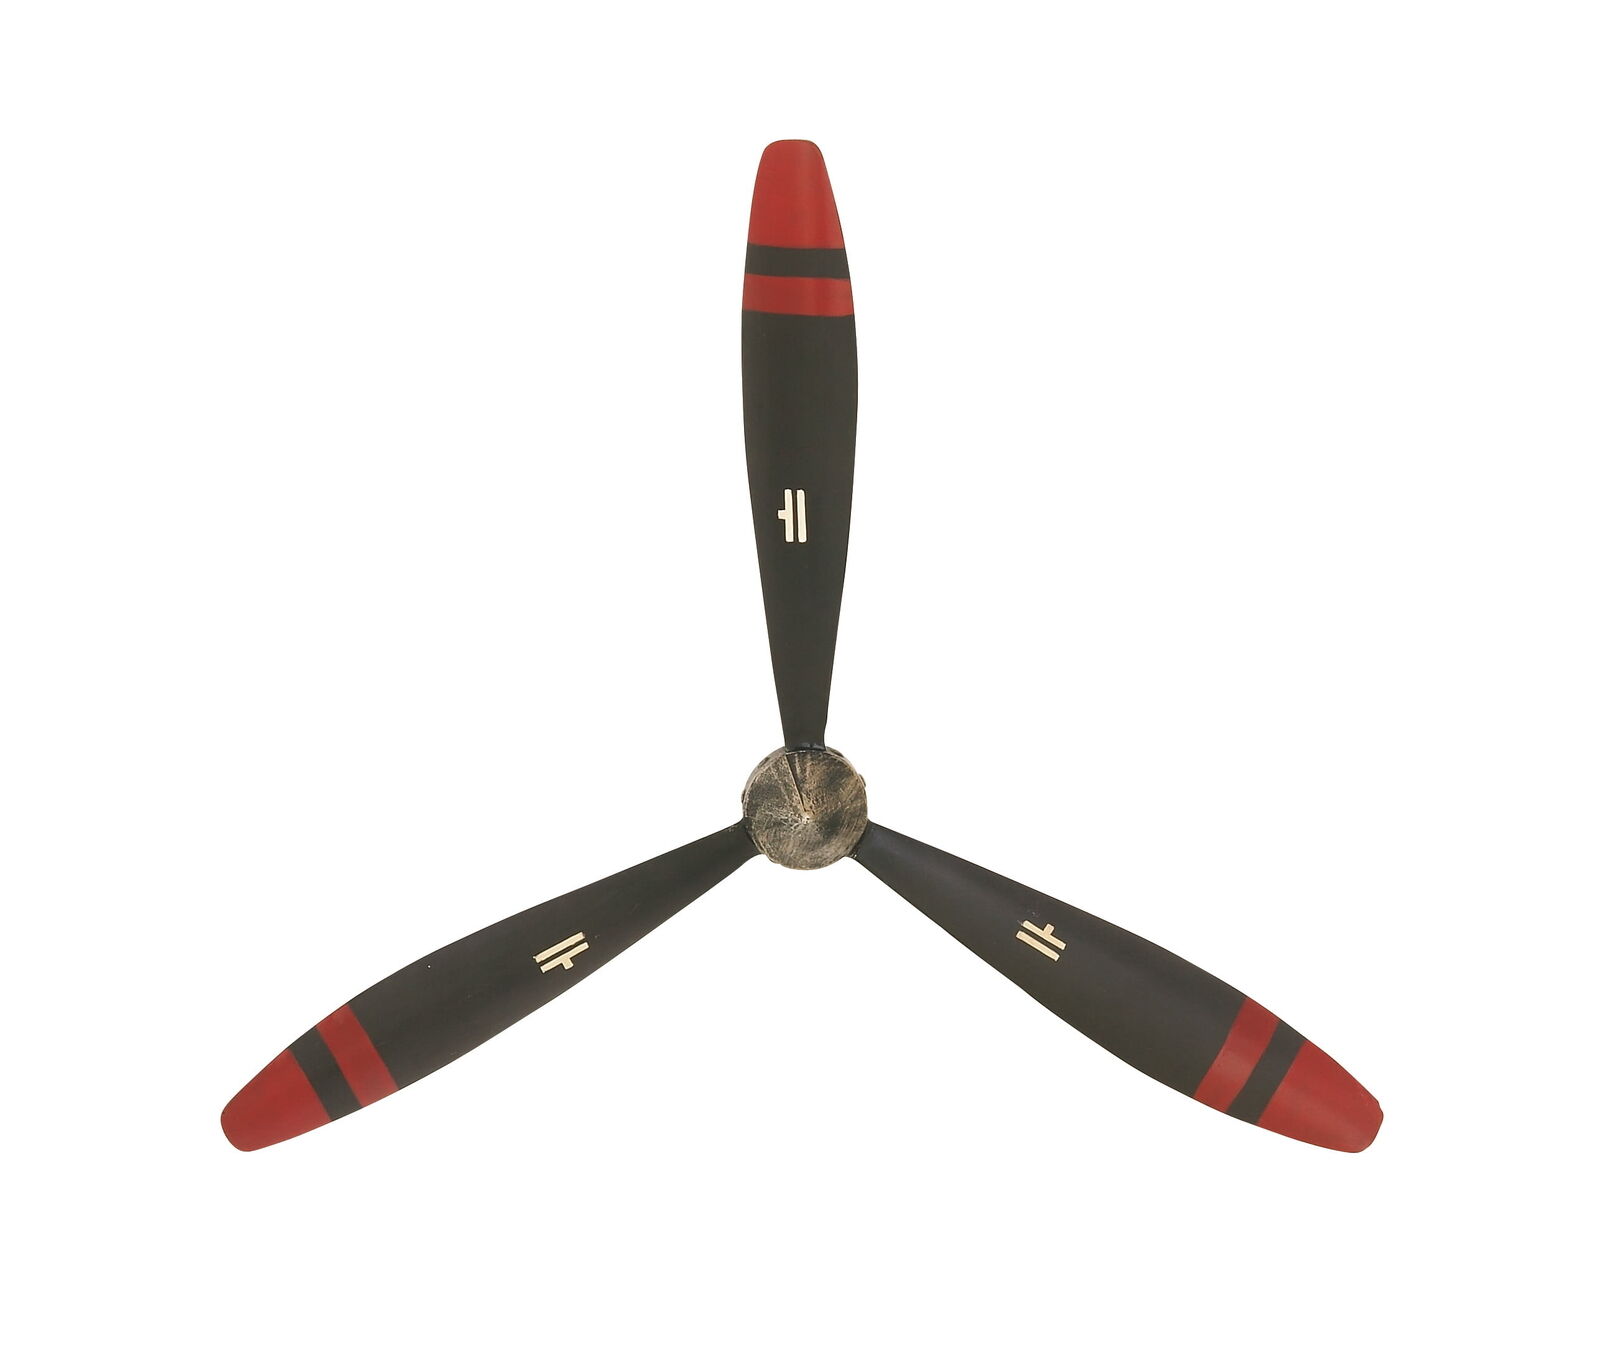 Black Metal 3 Blade Airplane Propeller Wall Decor with Aviation Detailing